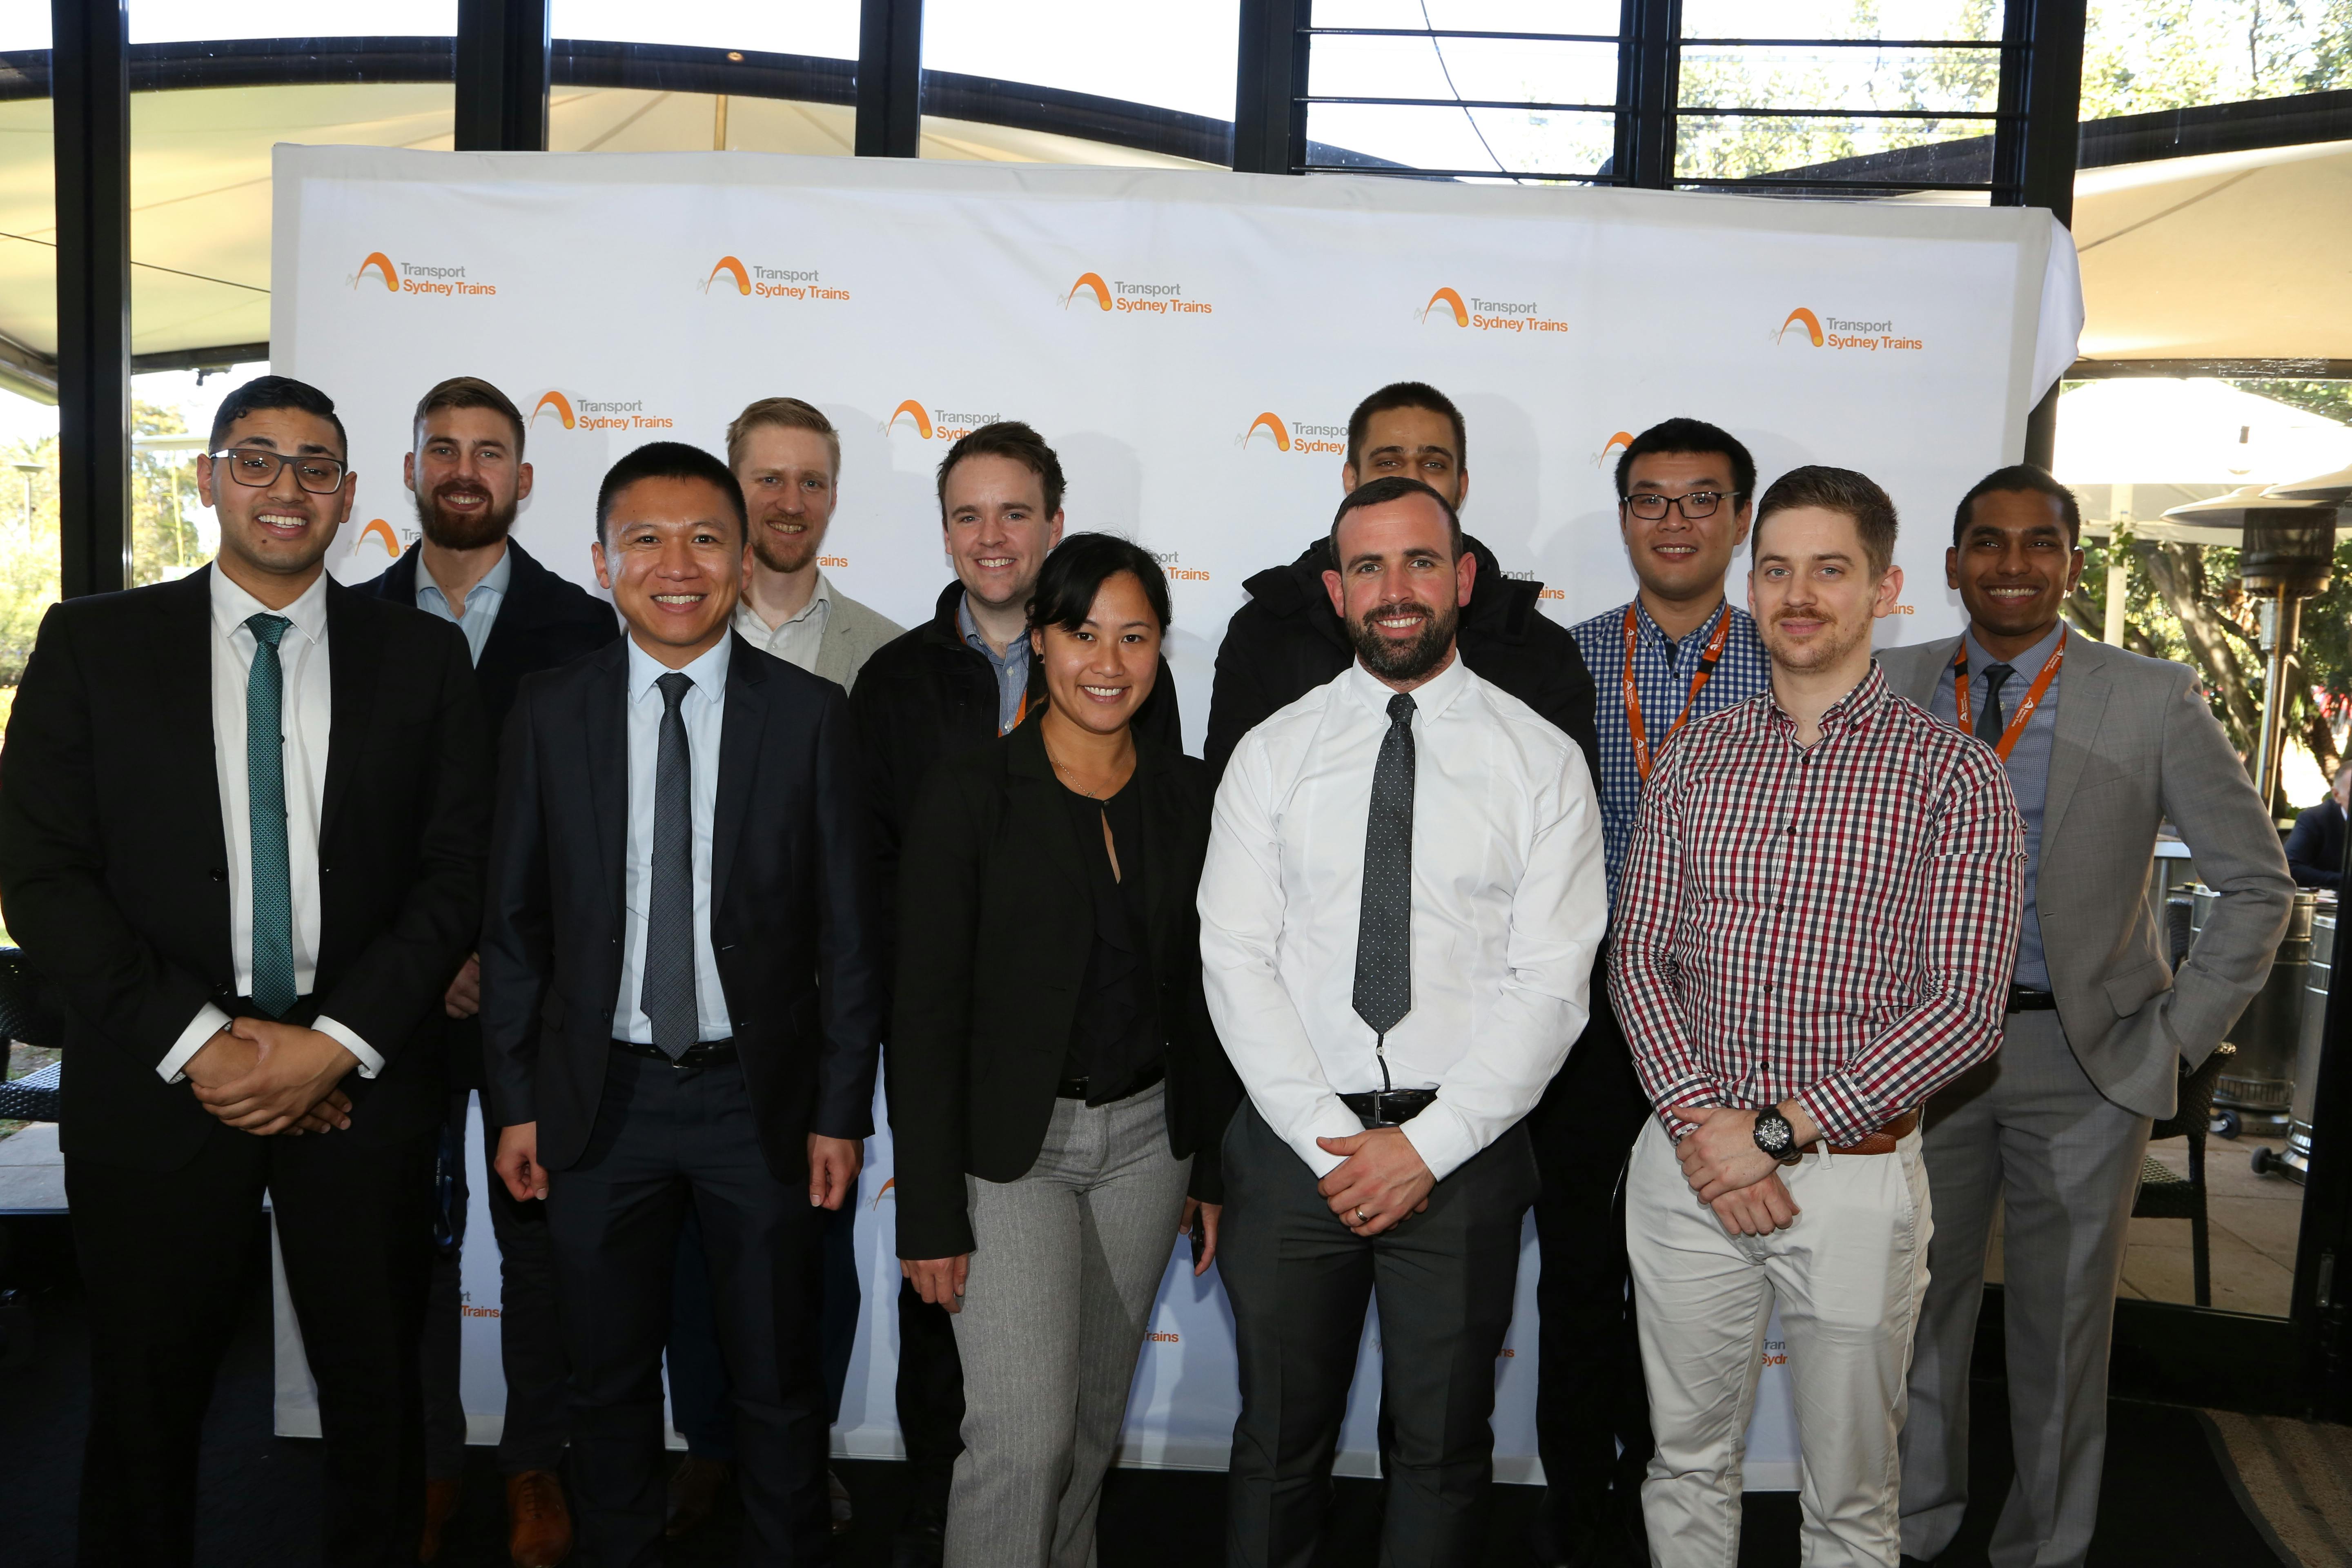 Sydney Trains Staff Excellence Awards 5